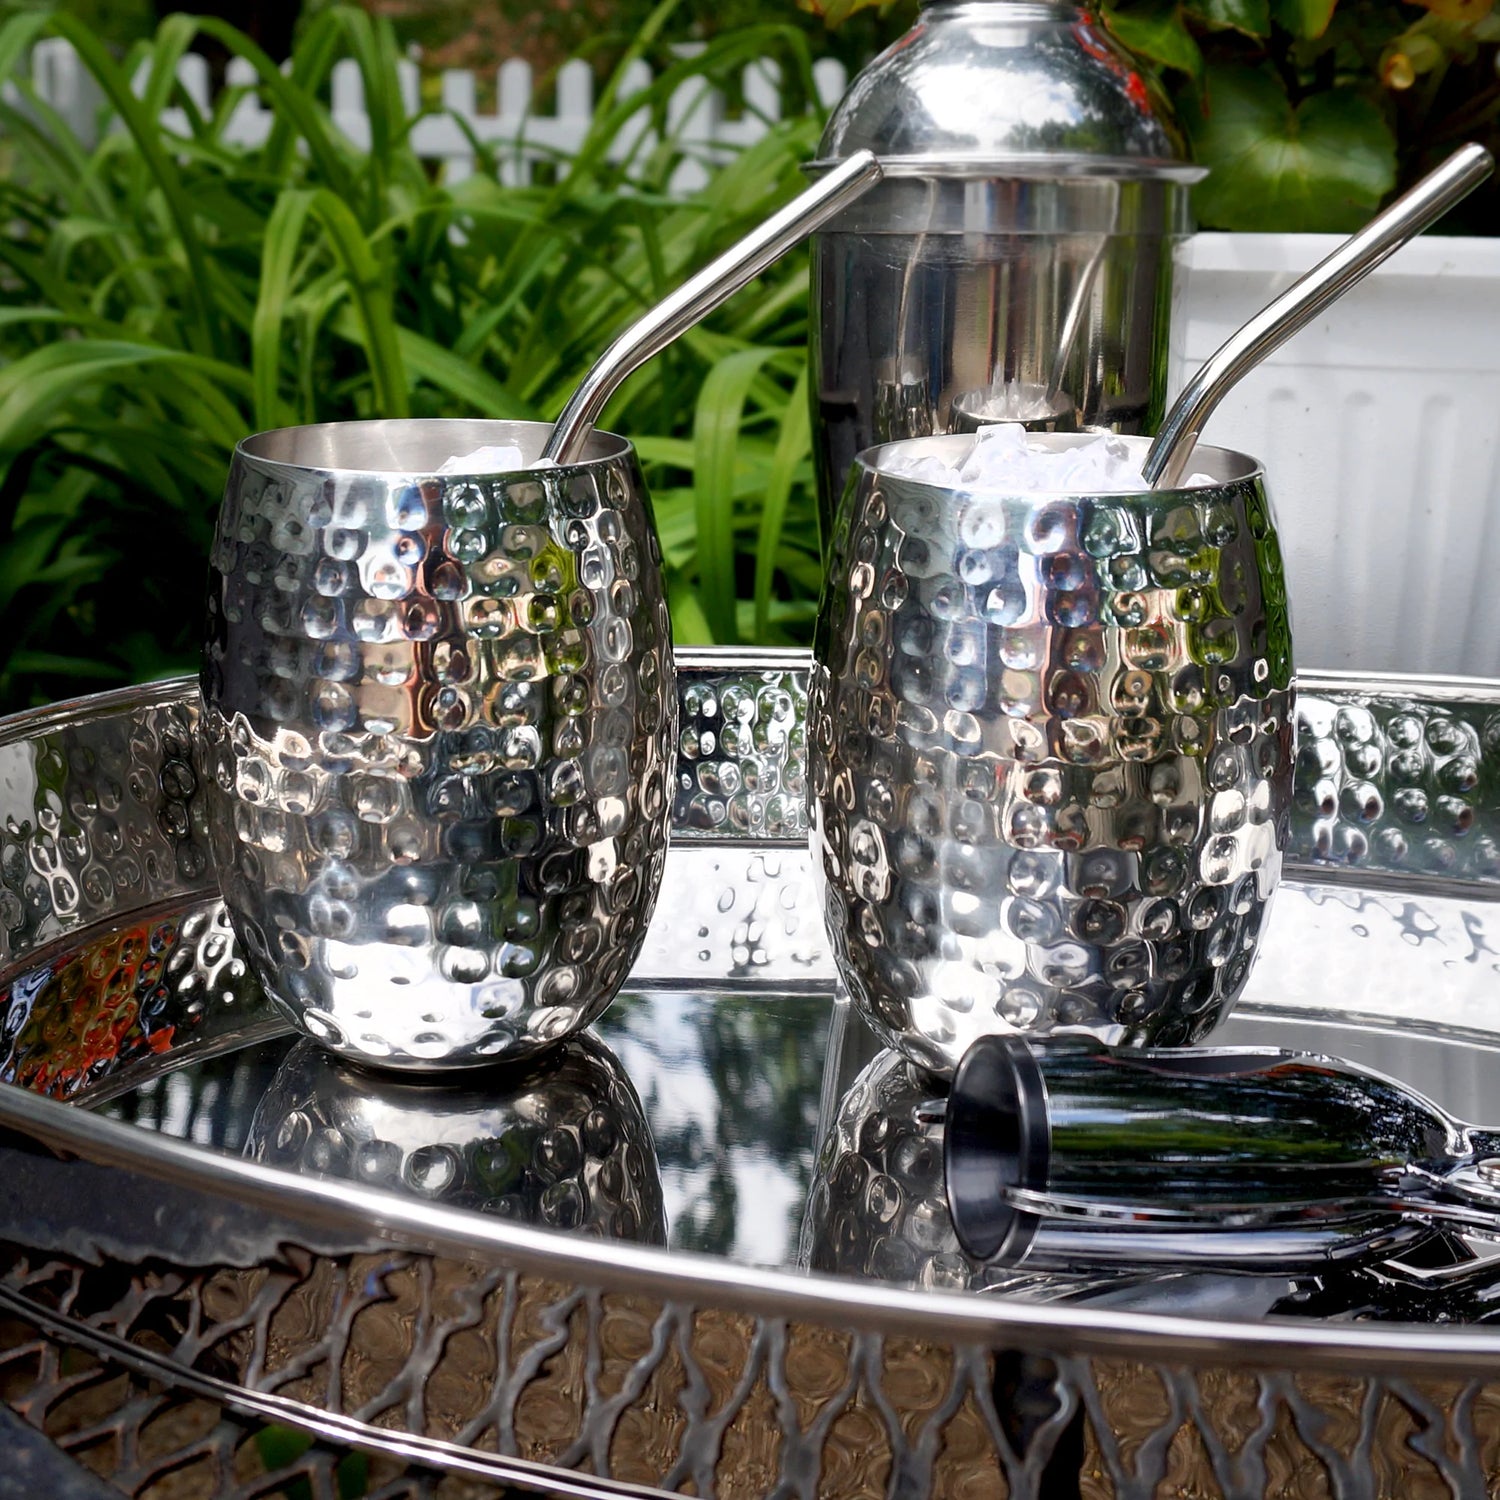 Brushed Steel Cups (4)